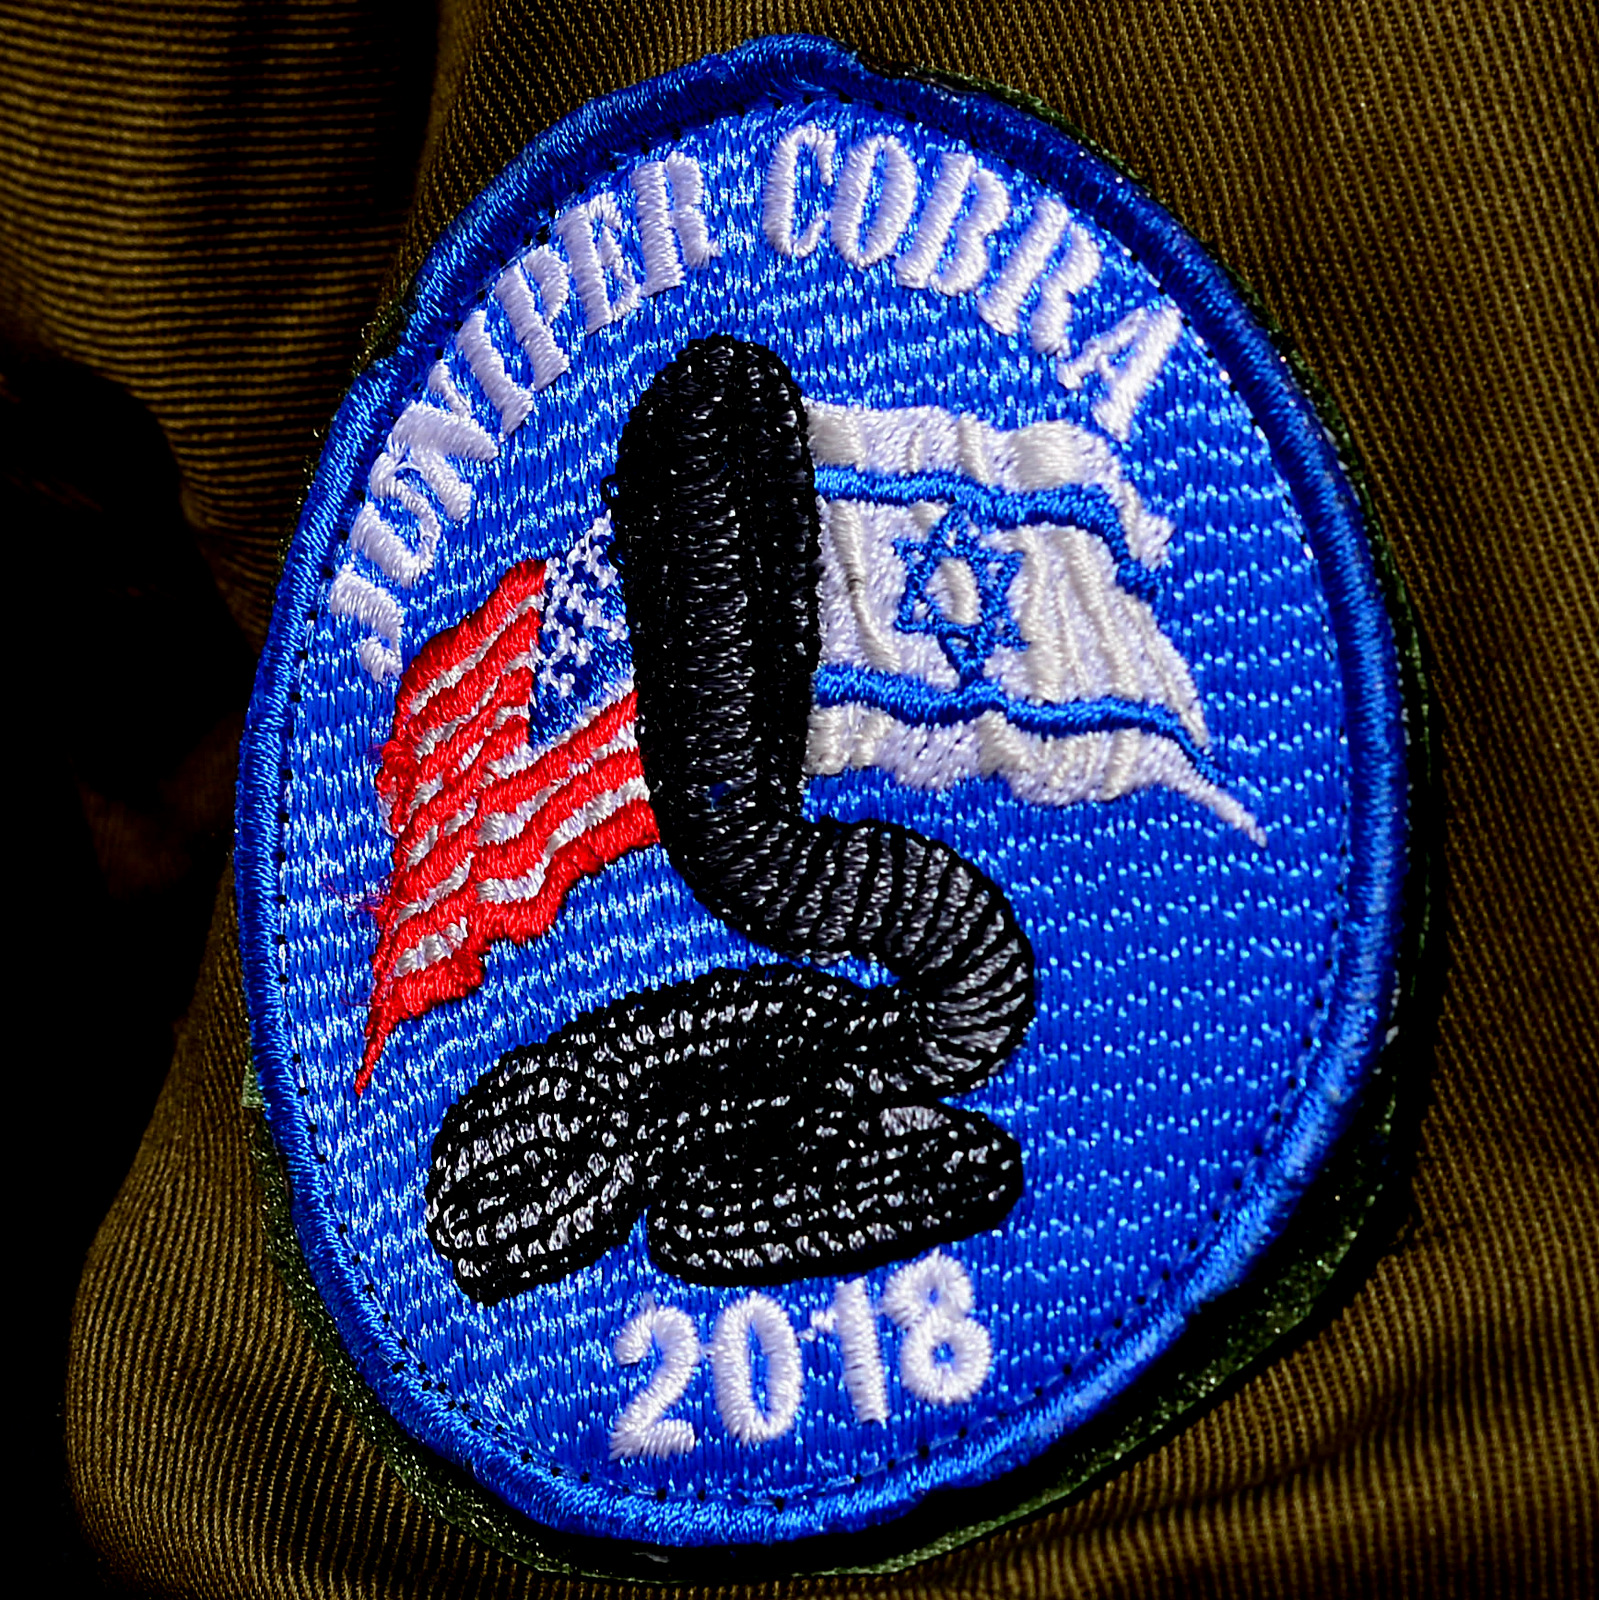 Juniper Cobra is U.S. European Command's largest bilateral exercise of 2018. It's part of a routine training cycle, designed to improve coordination between the U.S. and Israeli Defense Force (IDF), through a variety of computer-assisted simulations that range from rocket threats to crisis resupply, foreign disaster response and foreign humanitarian assistance. Operating cohesively, U.S. and IDF forces will deftly train over the next three weeks to increase regional security, stability and military readiness. (U.S. Air Force photo/ Tech. Sgt. Matthew Plew)